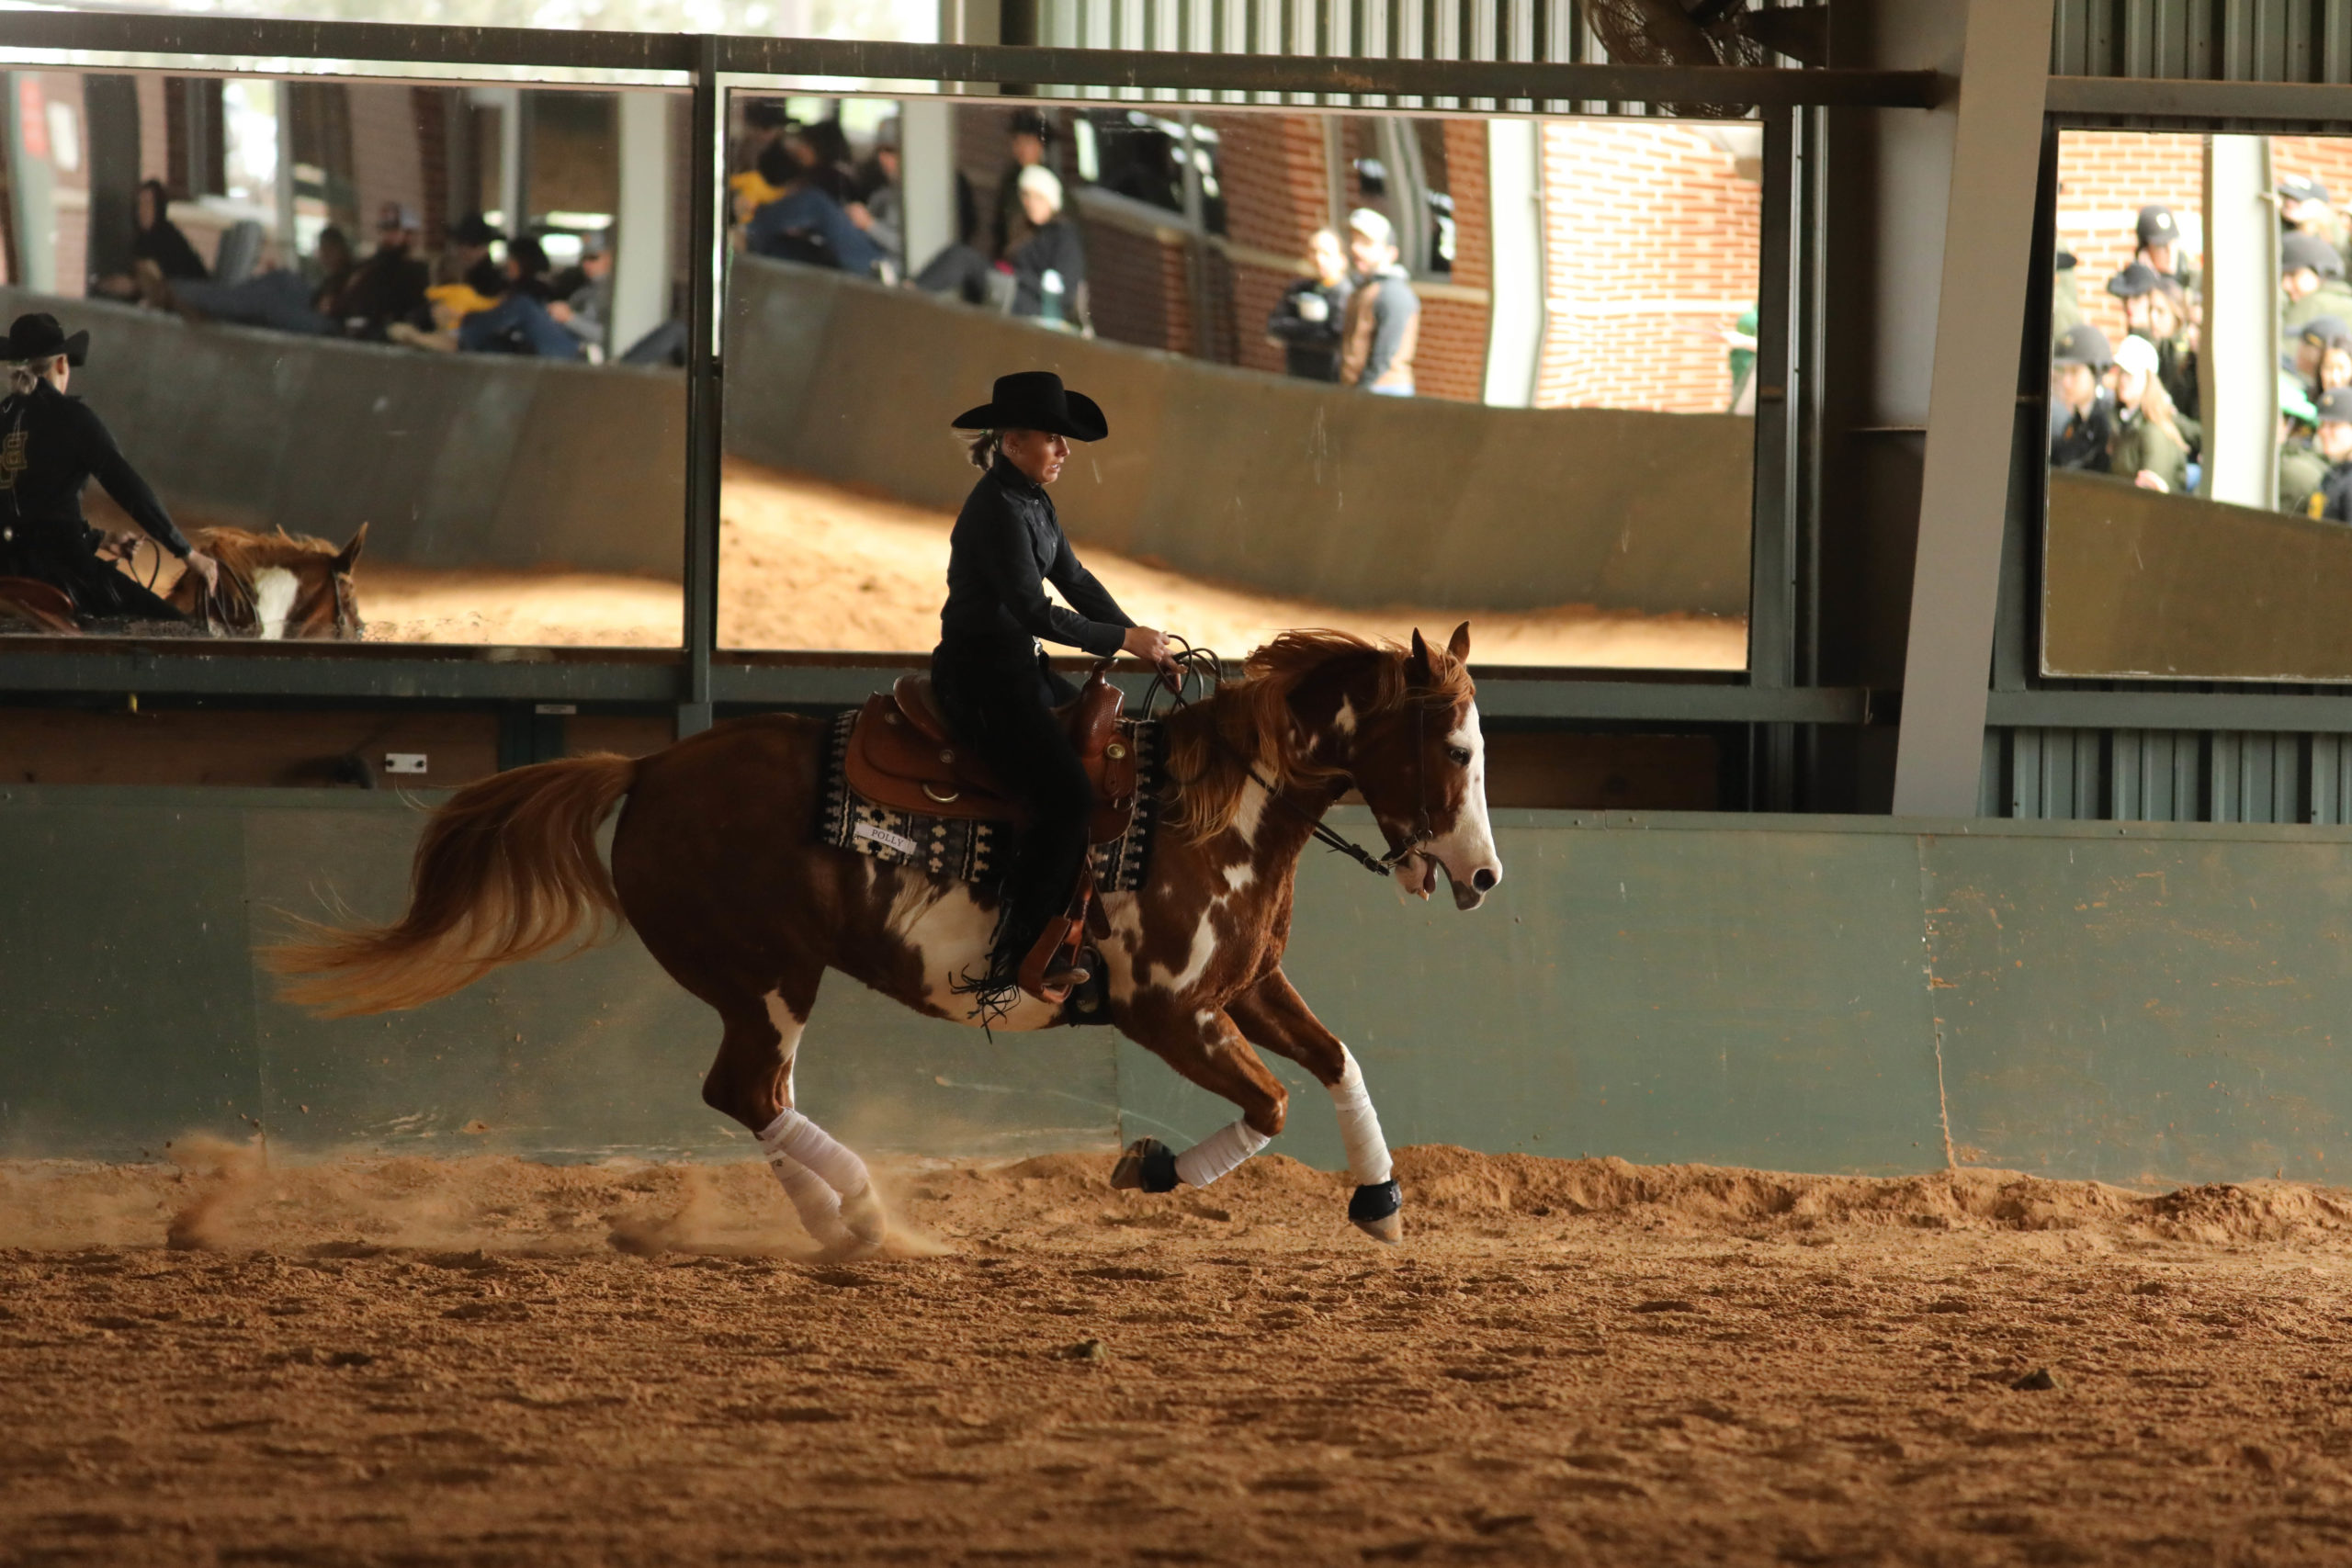 Baylor equestrian looks forward to new season - The Baylor Lariat